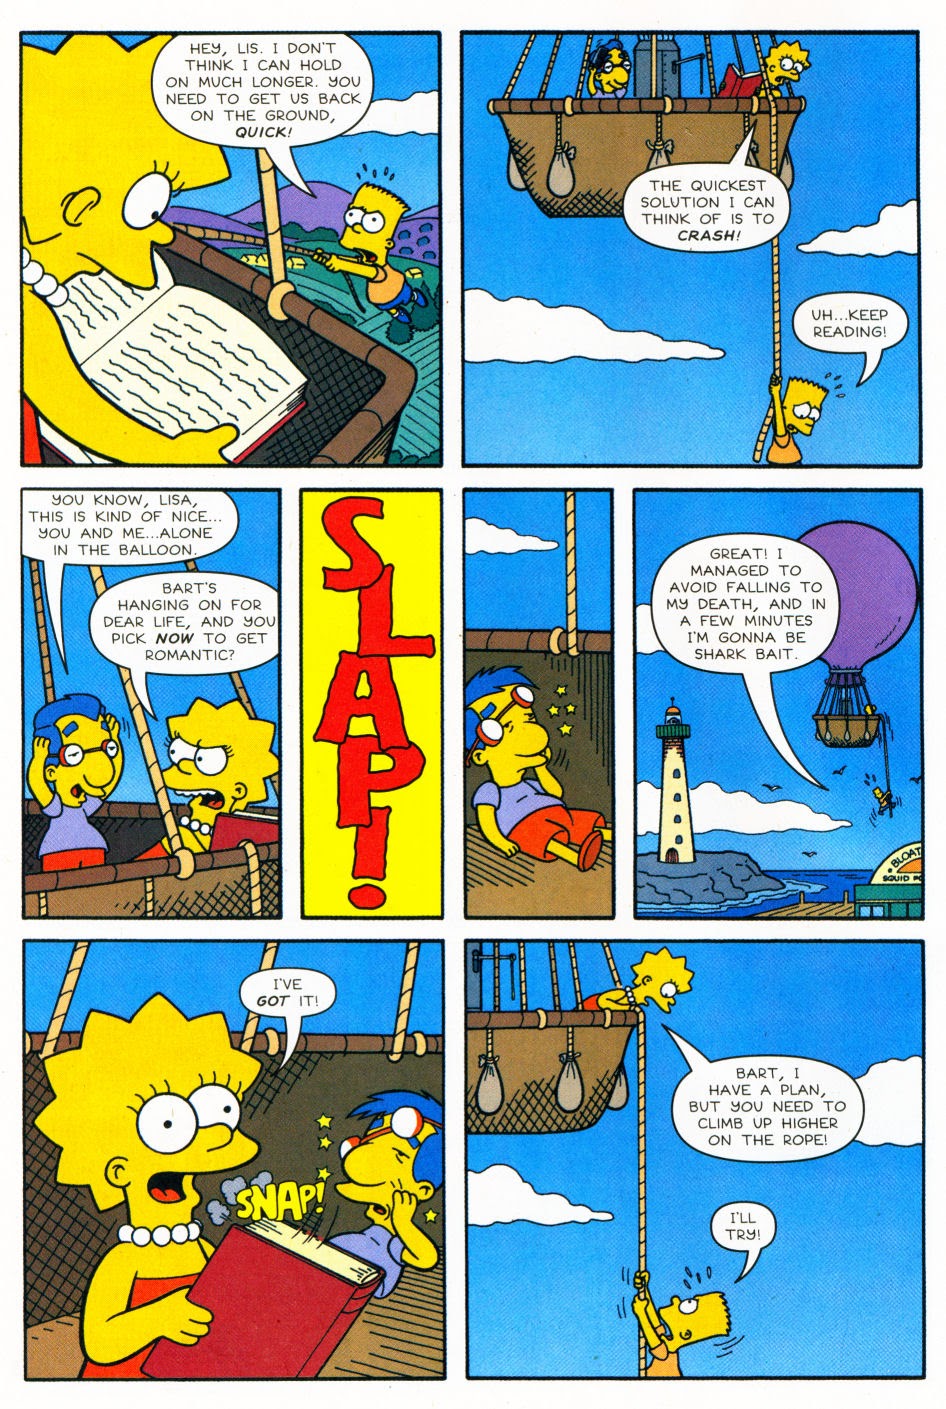 Read online Bart Simpson comic -  Issue #27 - 9